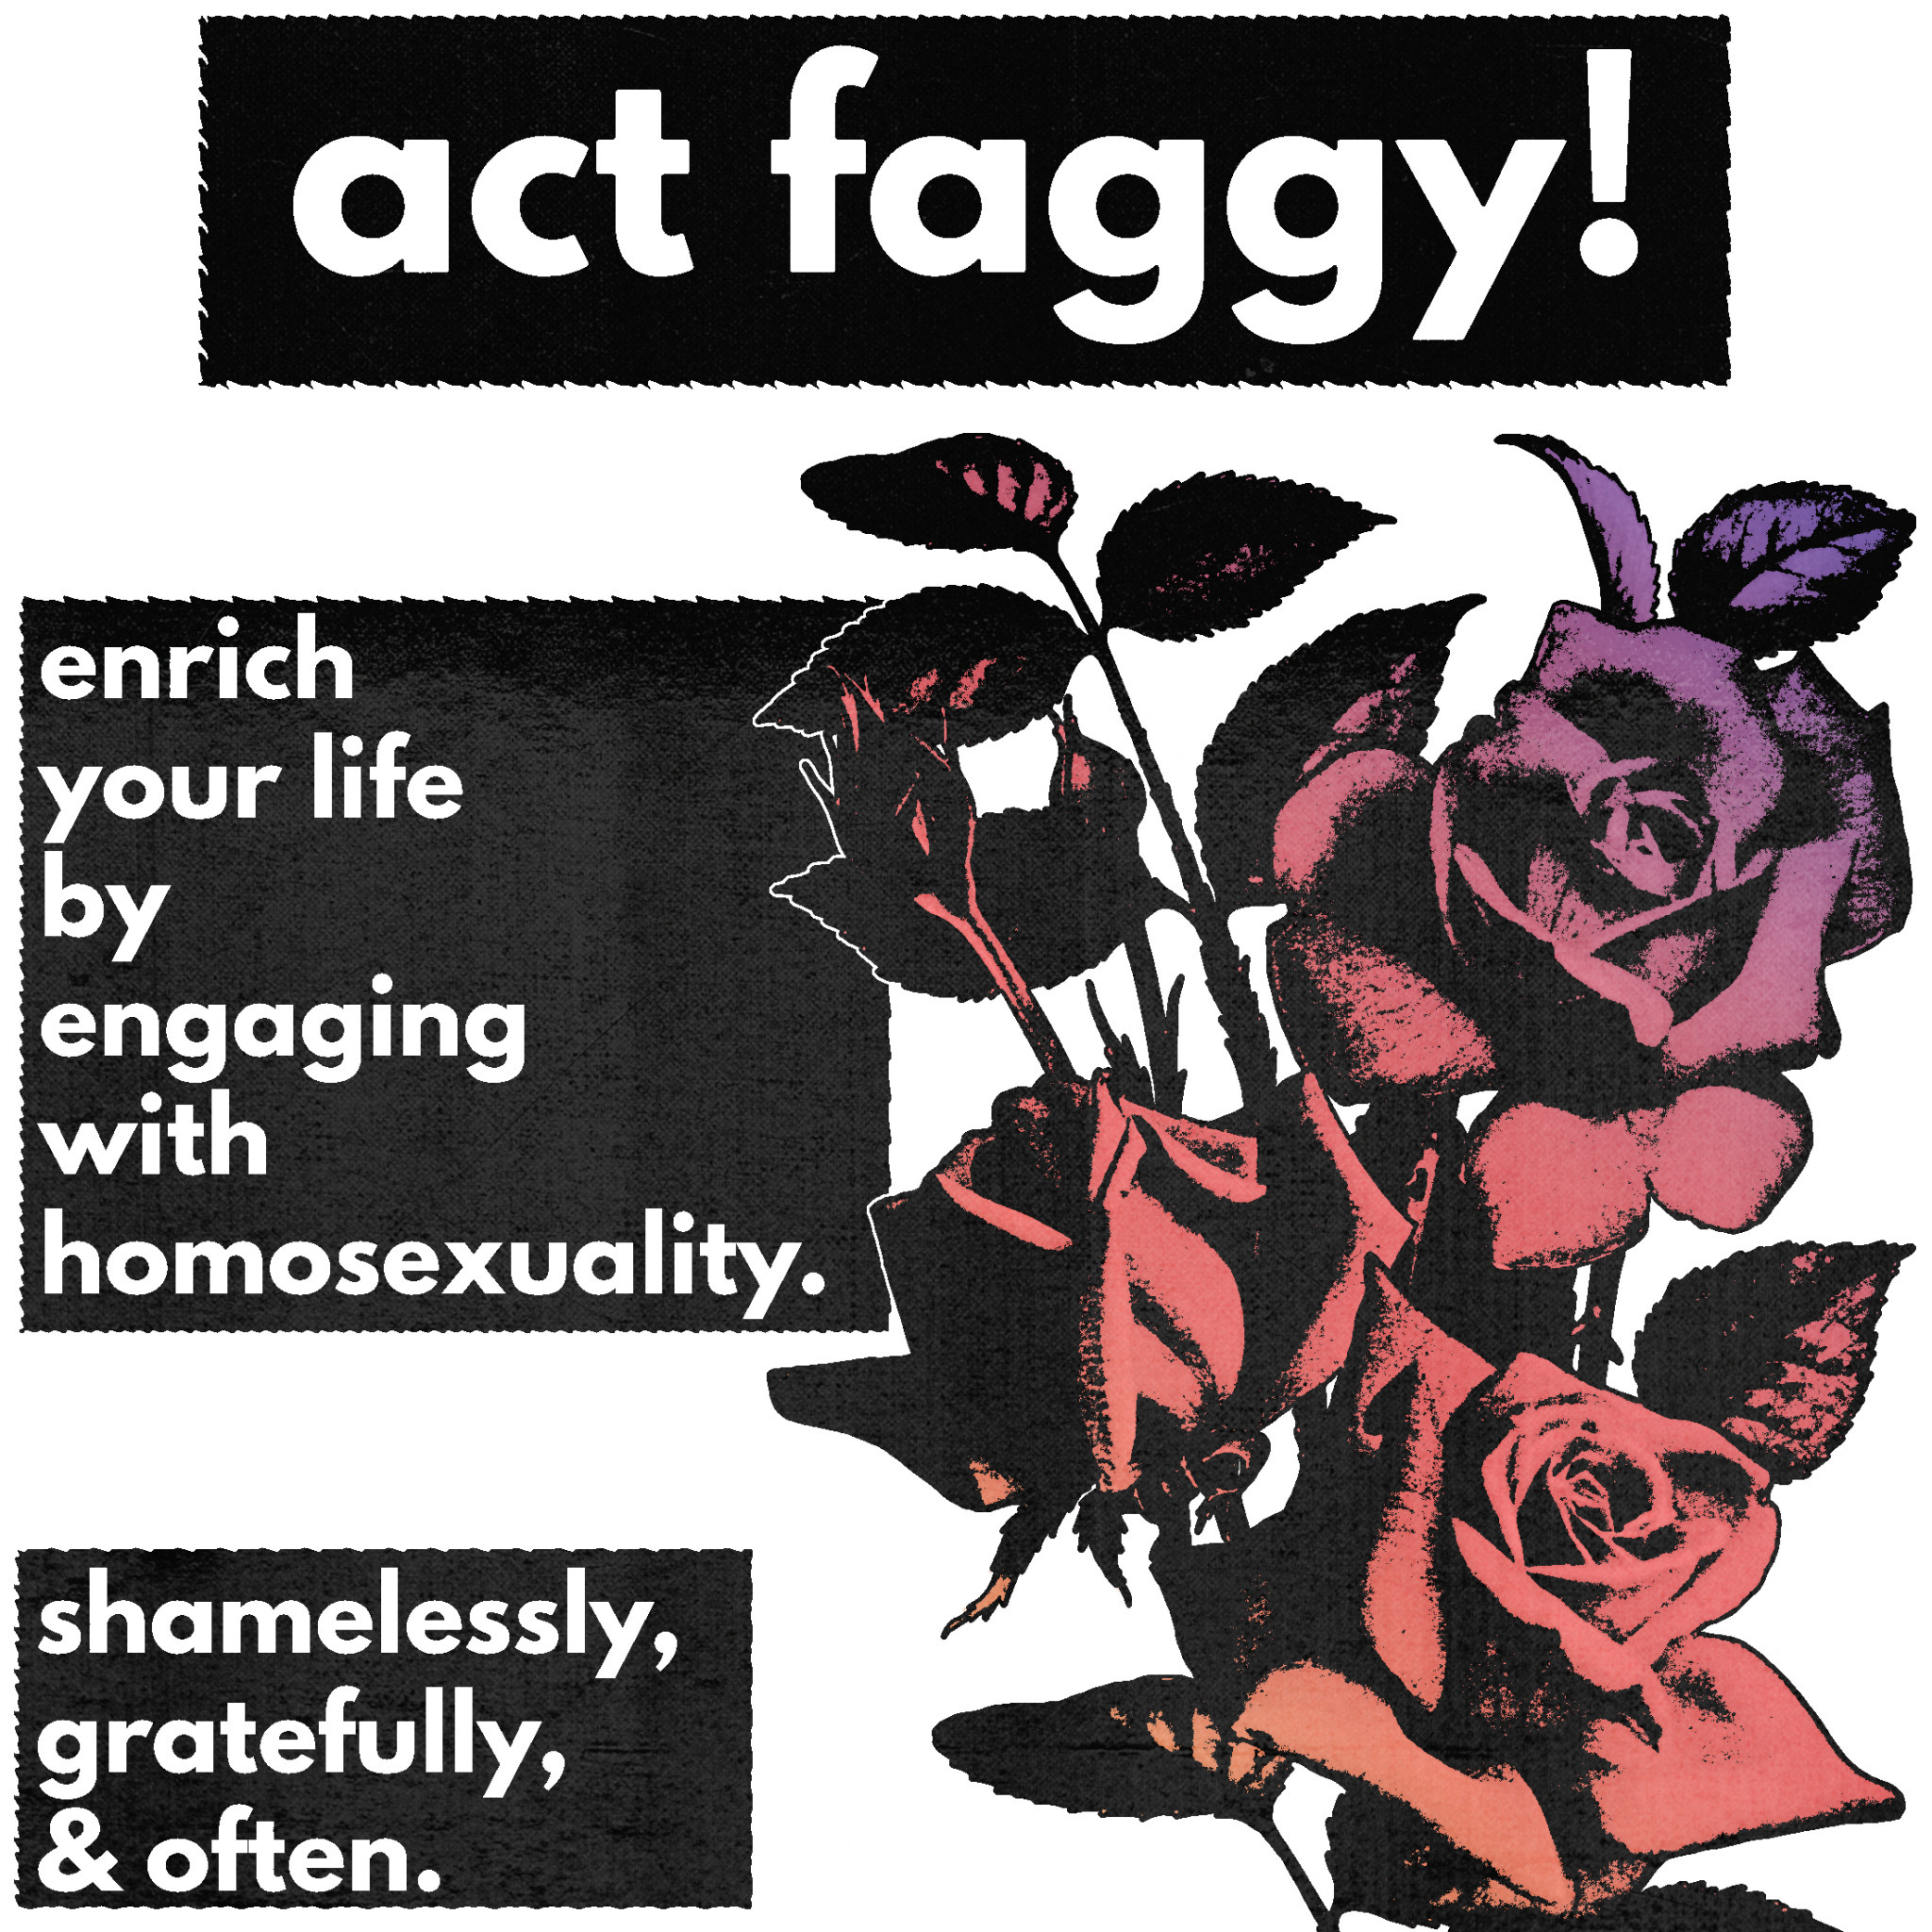 sweatermuppet:[Image ID: a typography edit. there is white text in black boxes that reads “act faggy! enrich your life by engaging with homosexuality. shamelessly, gratefully, & often.” to the right of the image is a stalk of roses with